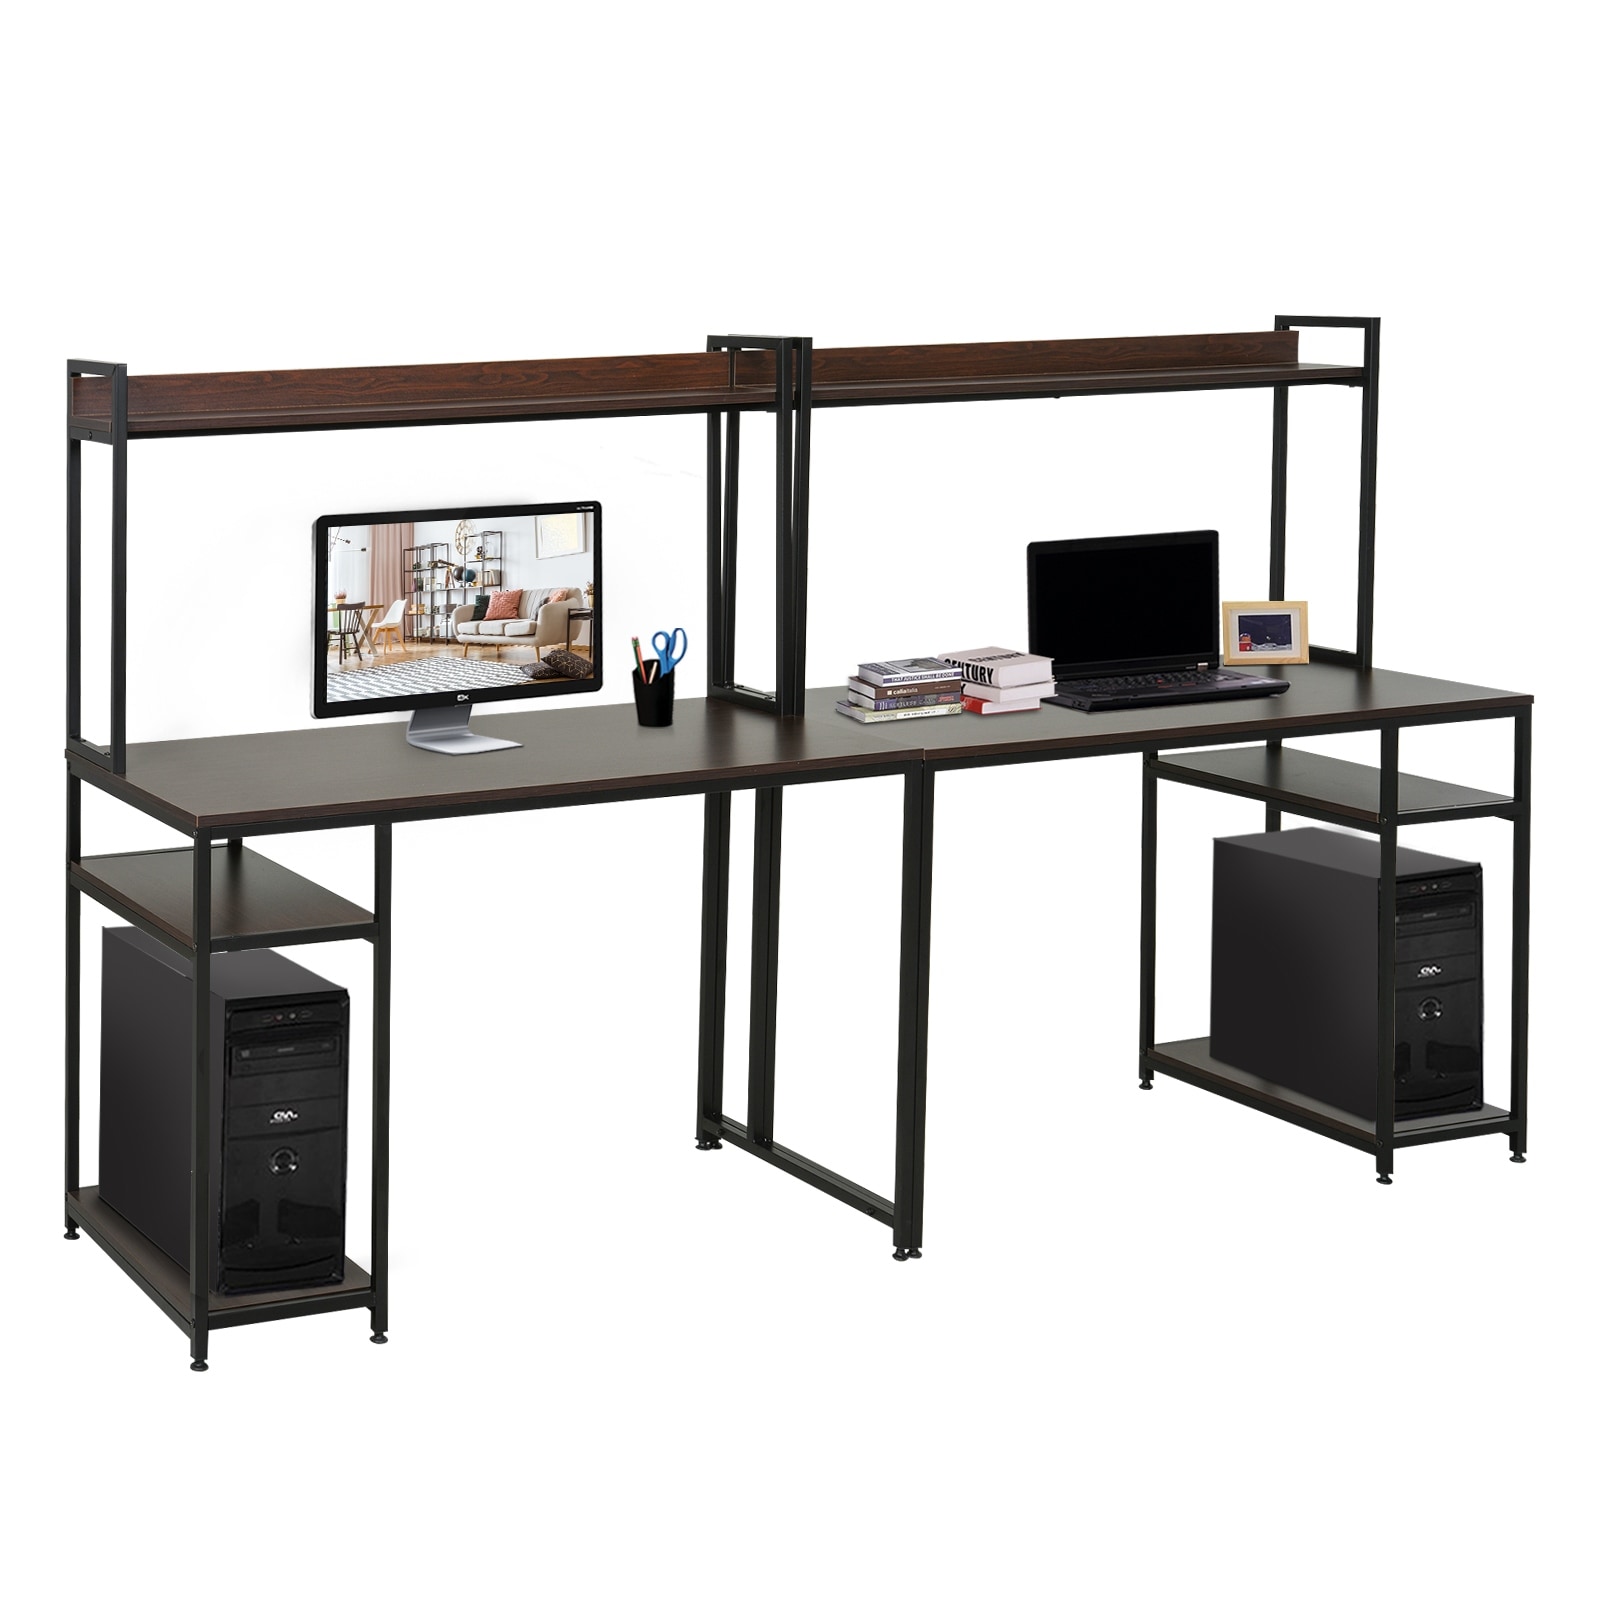 https://ak1.ostkcdn.com/images/products/is/images/direct/f8e8670e4b3e75688aa3edabe2632f7adfedea4c/HOMCOM-Industrial-Double-Computer-Desk-Home-Office-Writing-Table-For-Two-Person-Storage-w--Open-Shelf.jpg